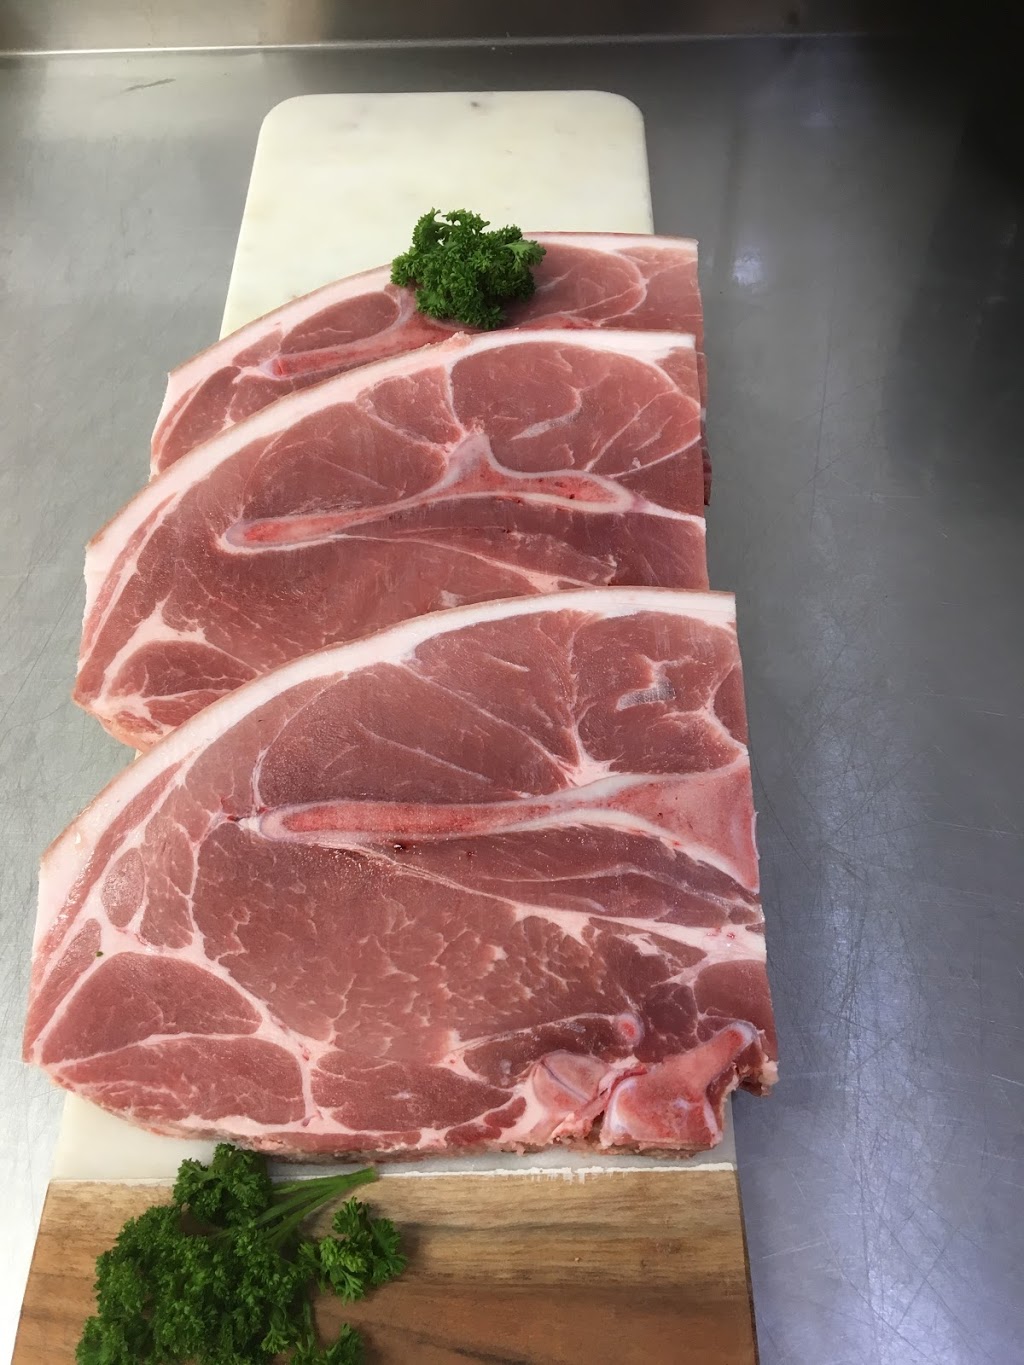 South City Quality Meats | store | Southcity Shopping Centre, shop 1/1-7 Tanda Pl, Wagga Wagga NSW 2650, Australia | 0269316650 OR +61 2 6931 6650